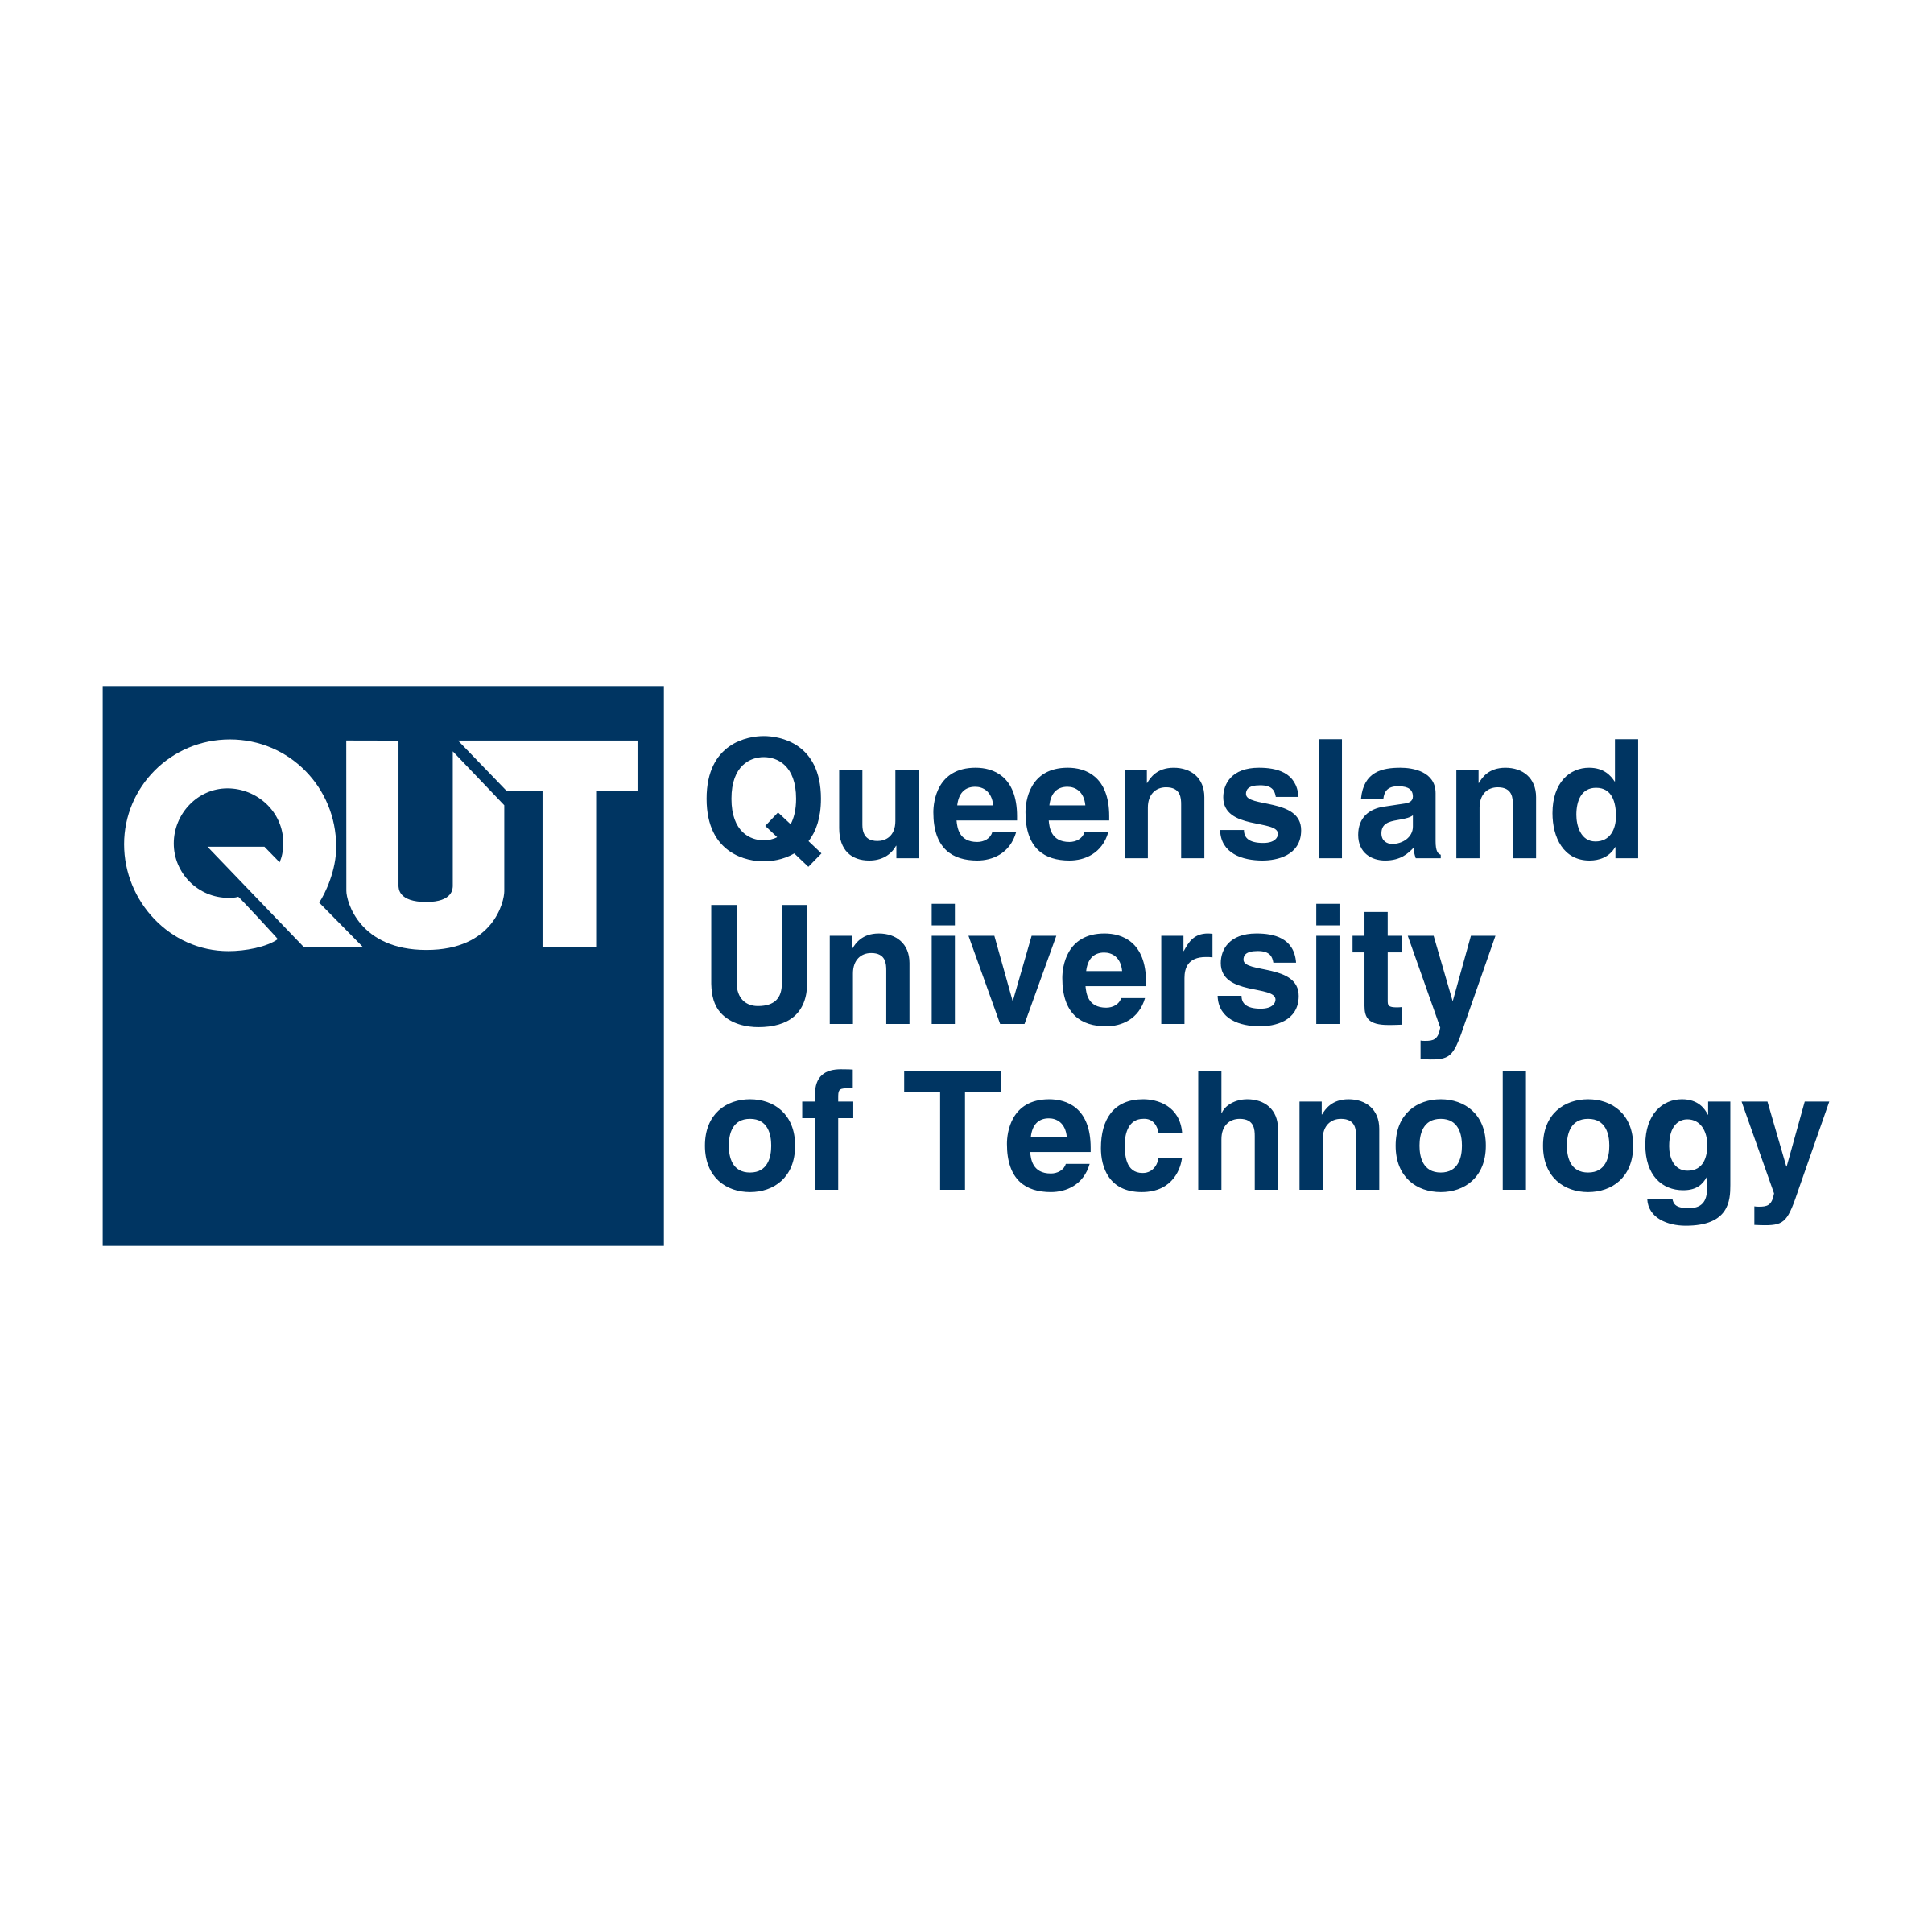 Graduate Certificate in Business (Forensic Accounting) | Graduate diploma / certificate | Business | On Campus | 6 months | Queensland University of Technology | Australia